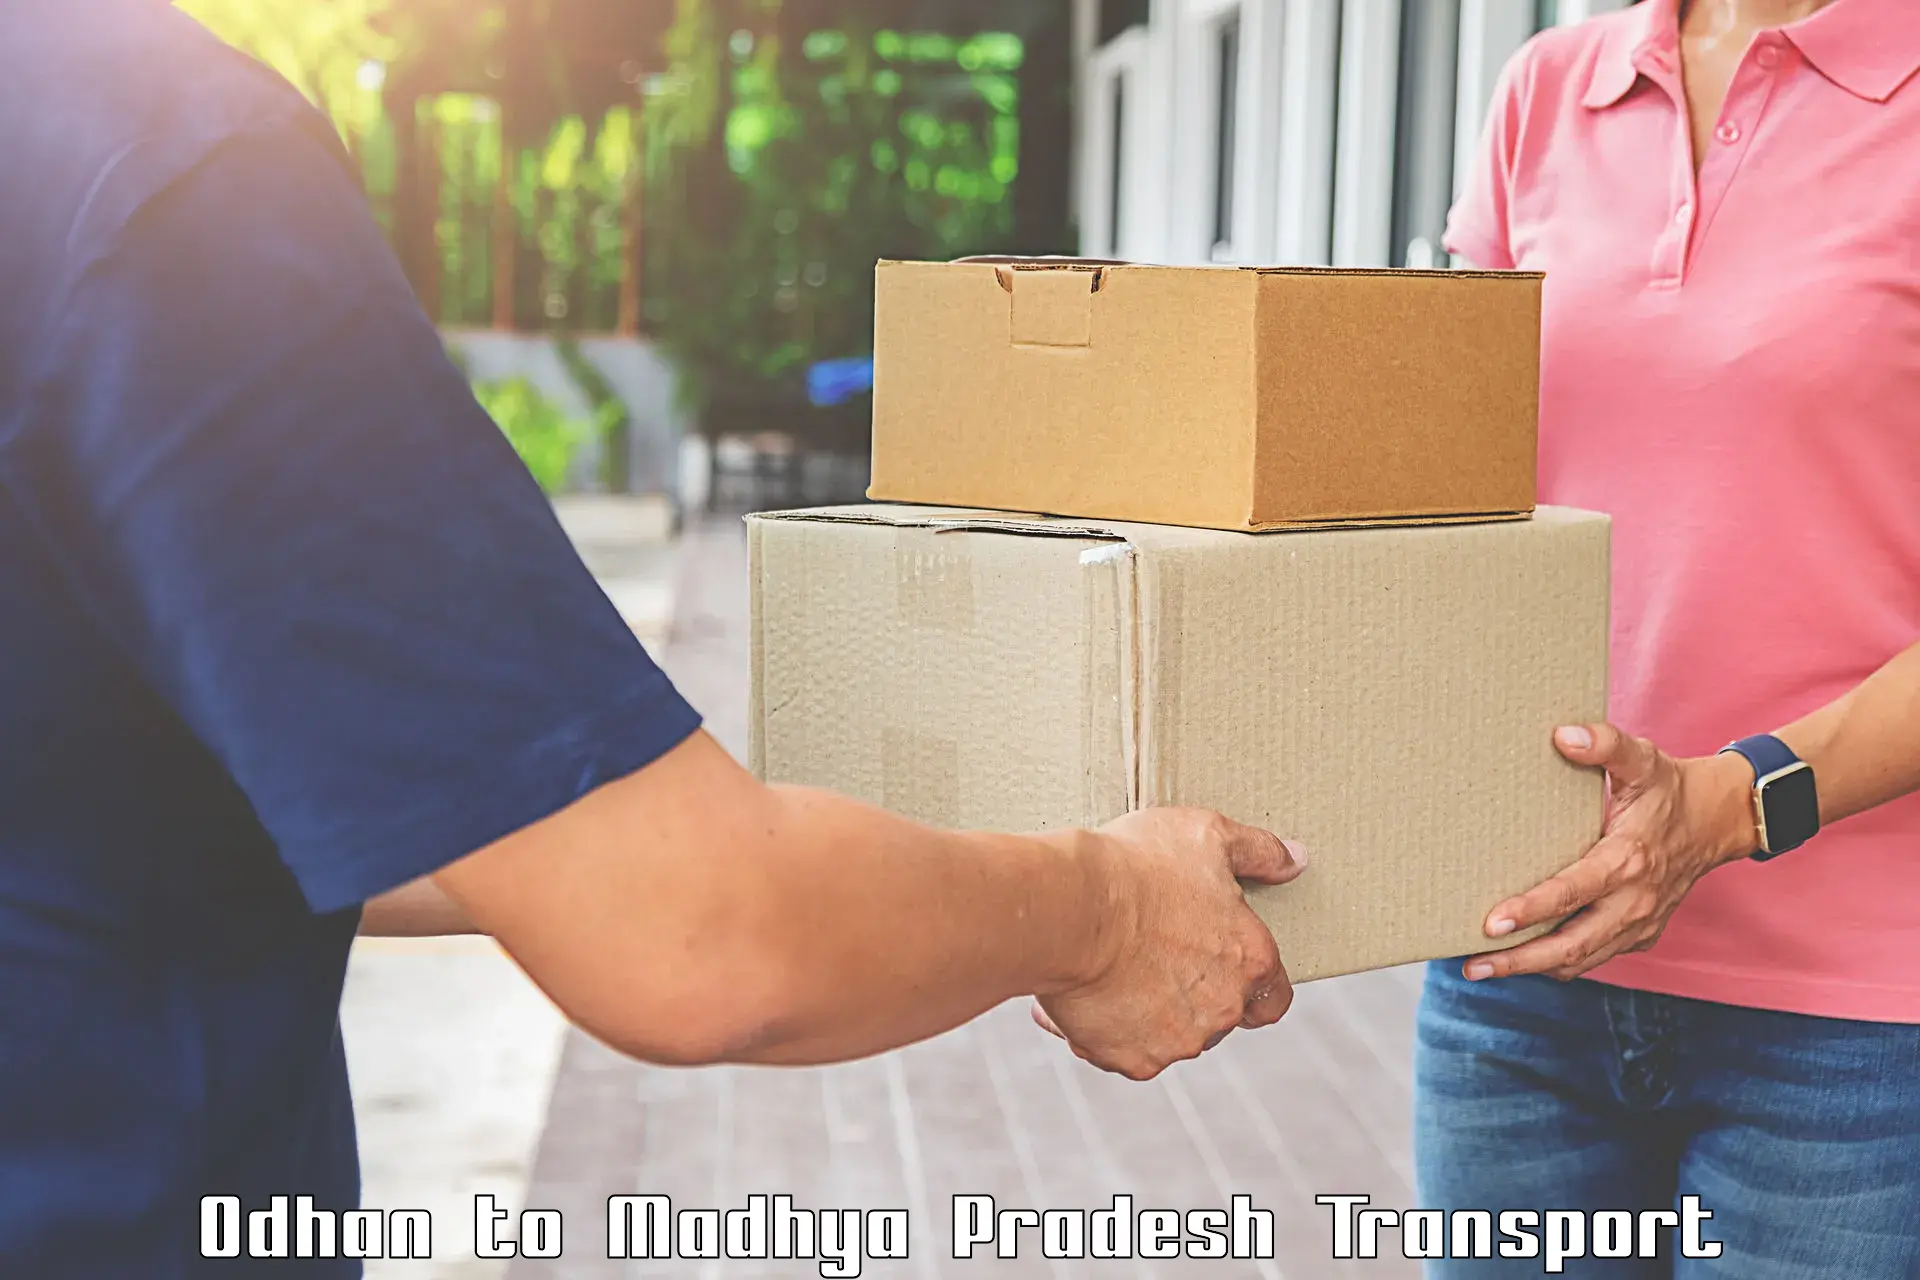 Furniture transport service Odhan to Gwalior